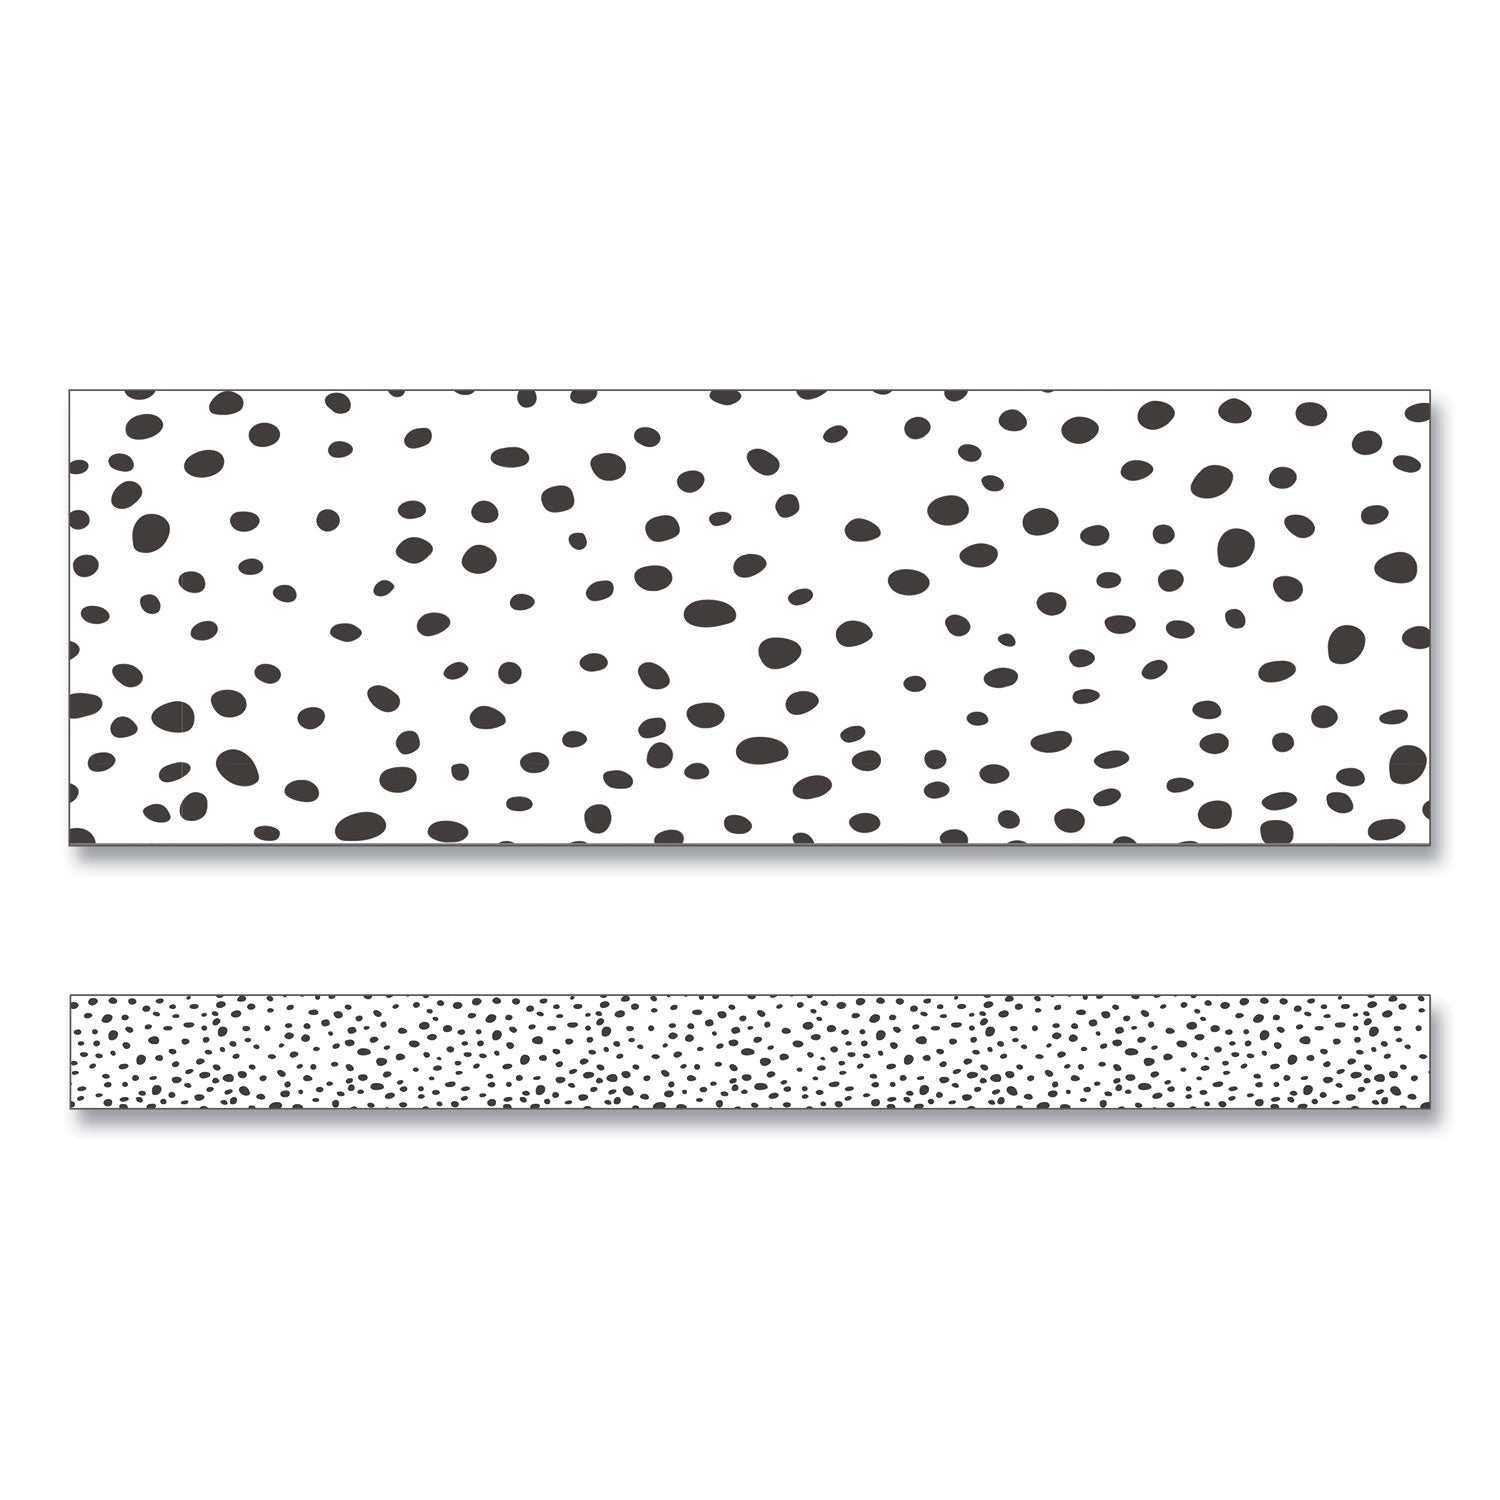 straight-borders-3-x-3-ft-black-white-dotted-12-pack_cdp108495 - 1